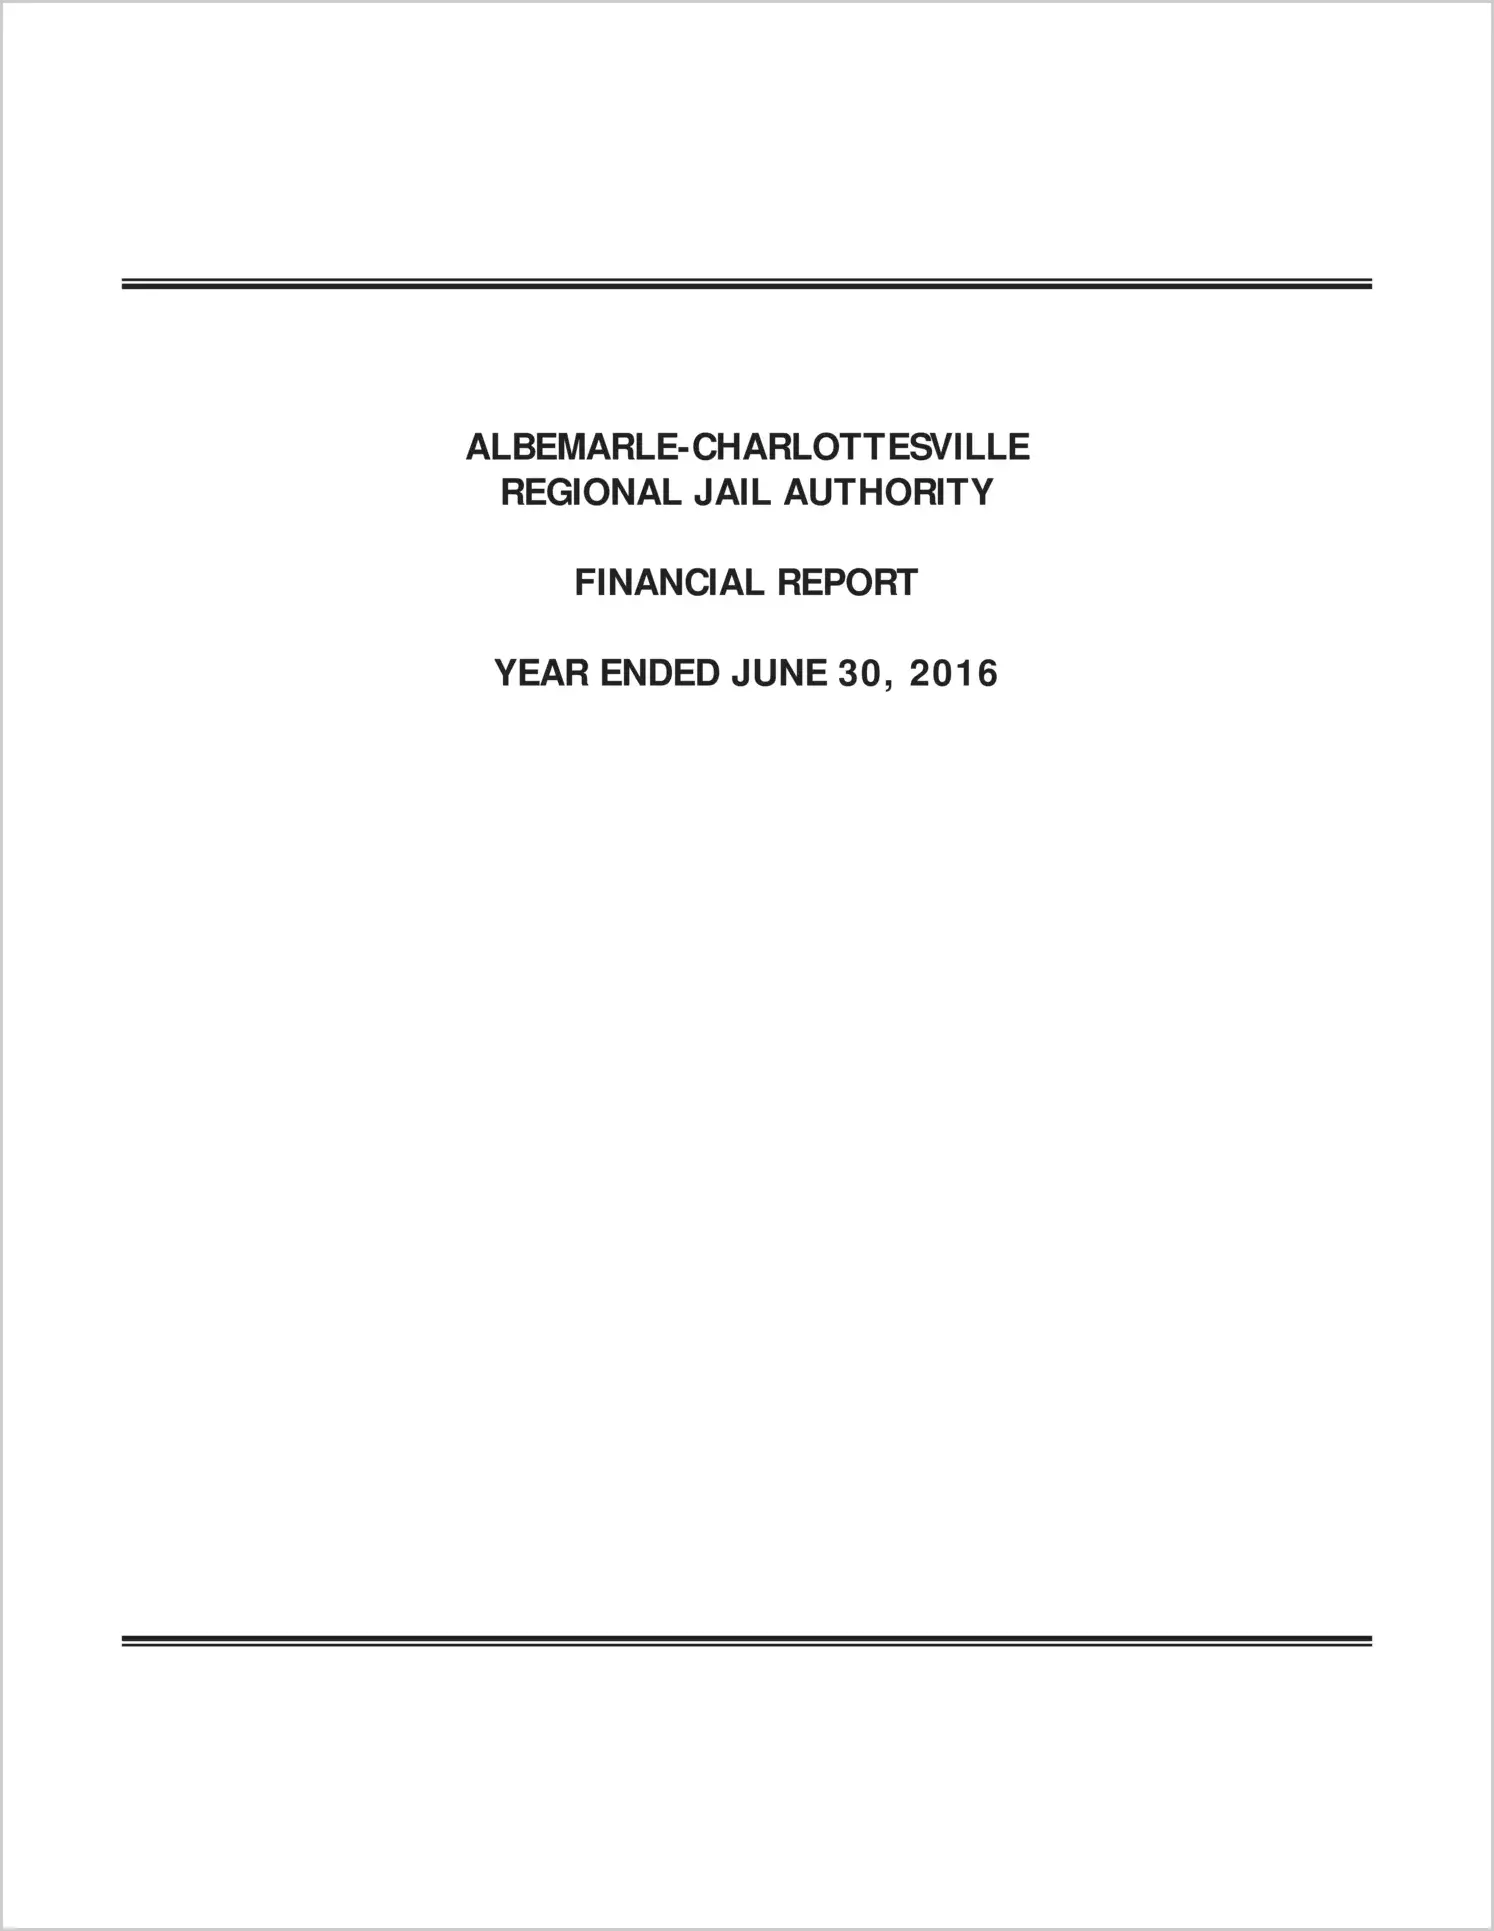 2016 ABC/Other Annual Financial Report  for Albemarle-Charlottesville Regional Jail Authority